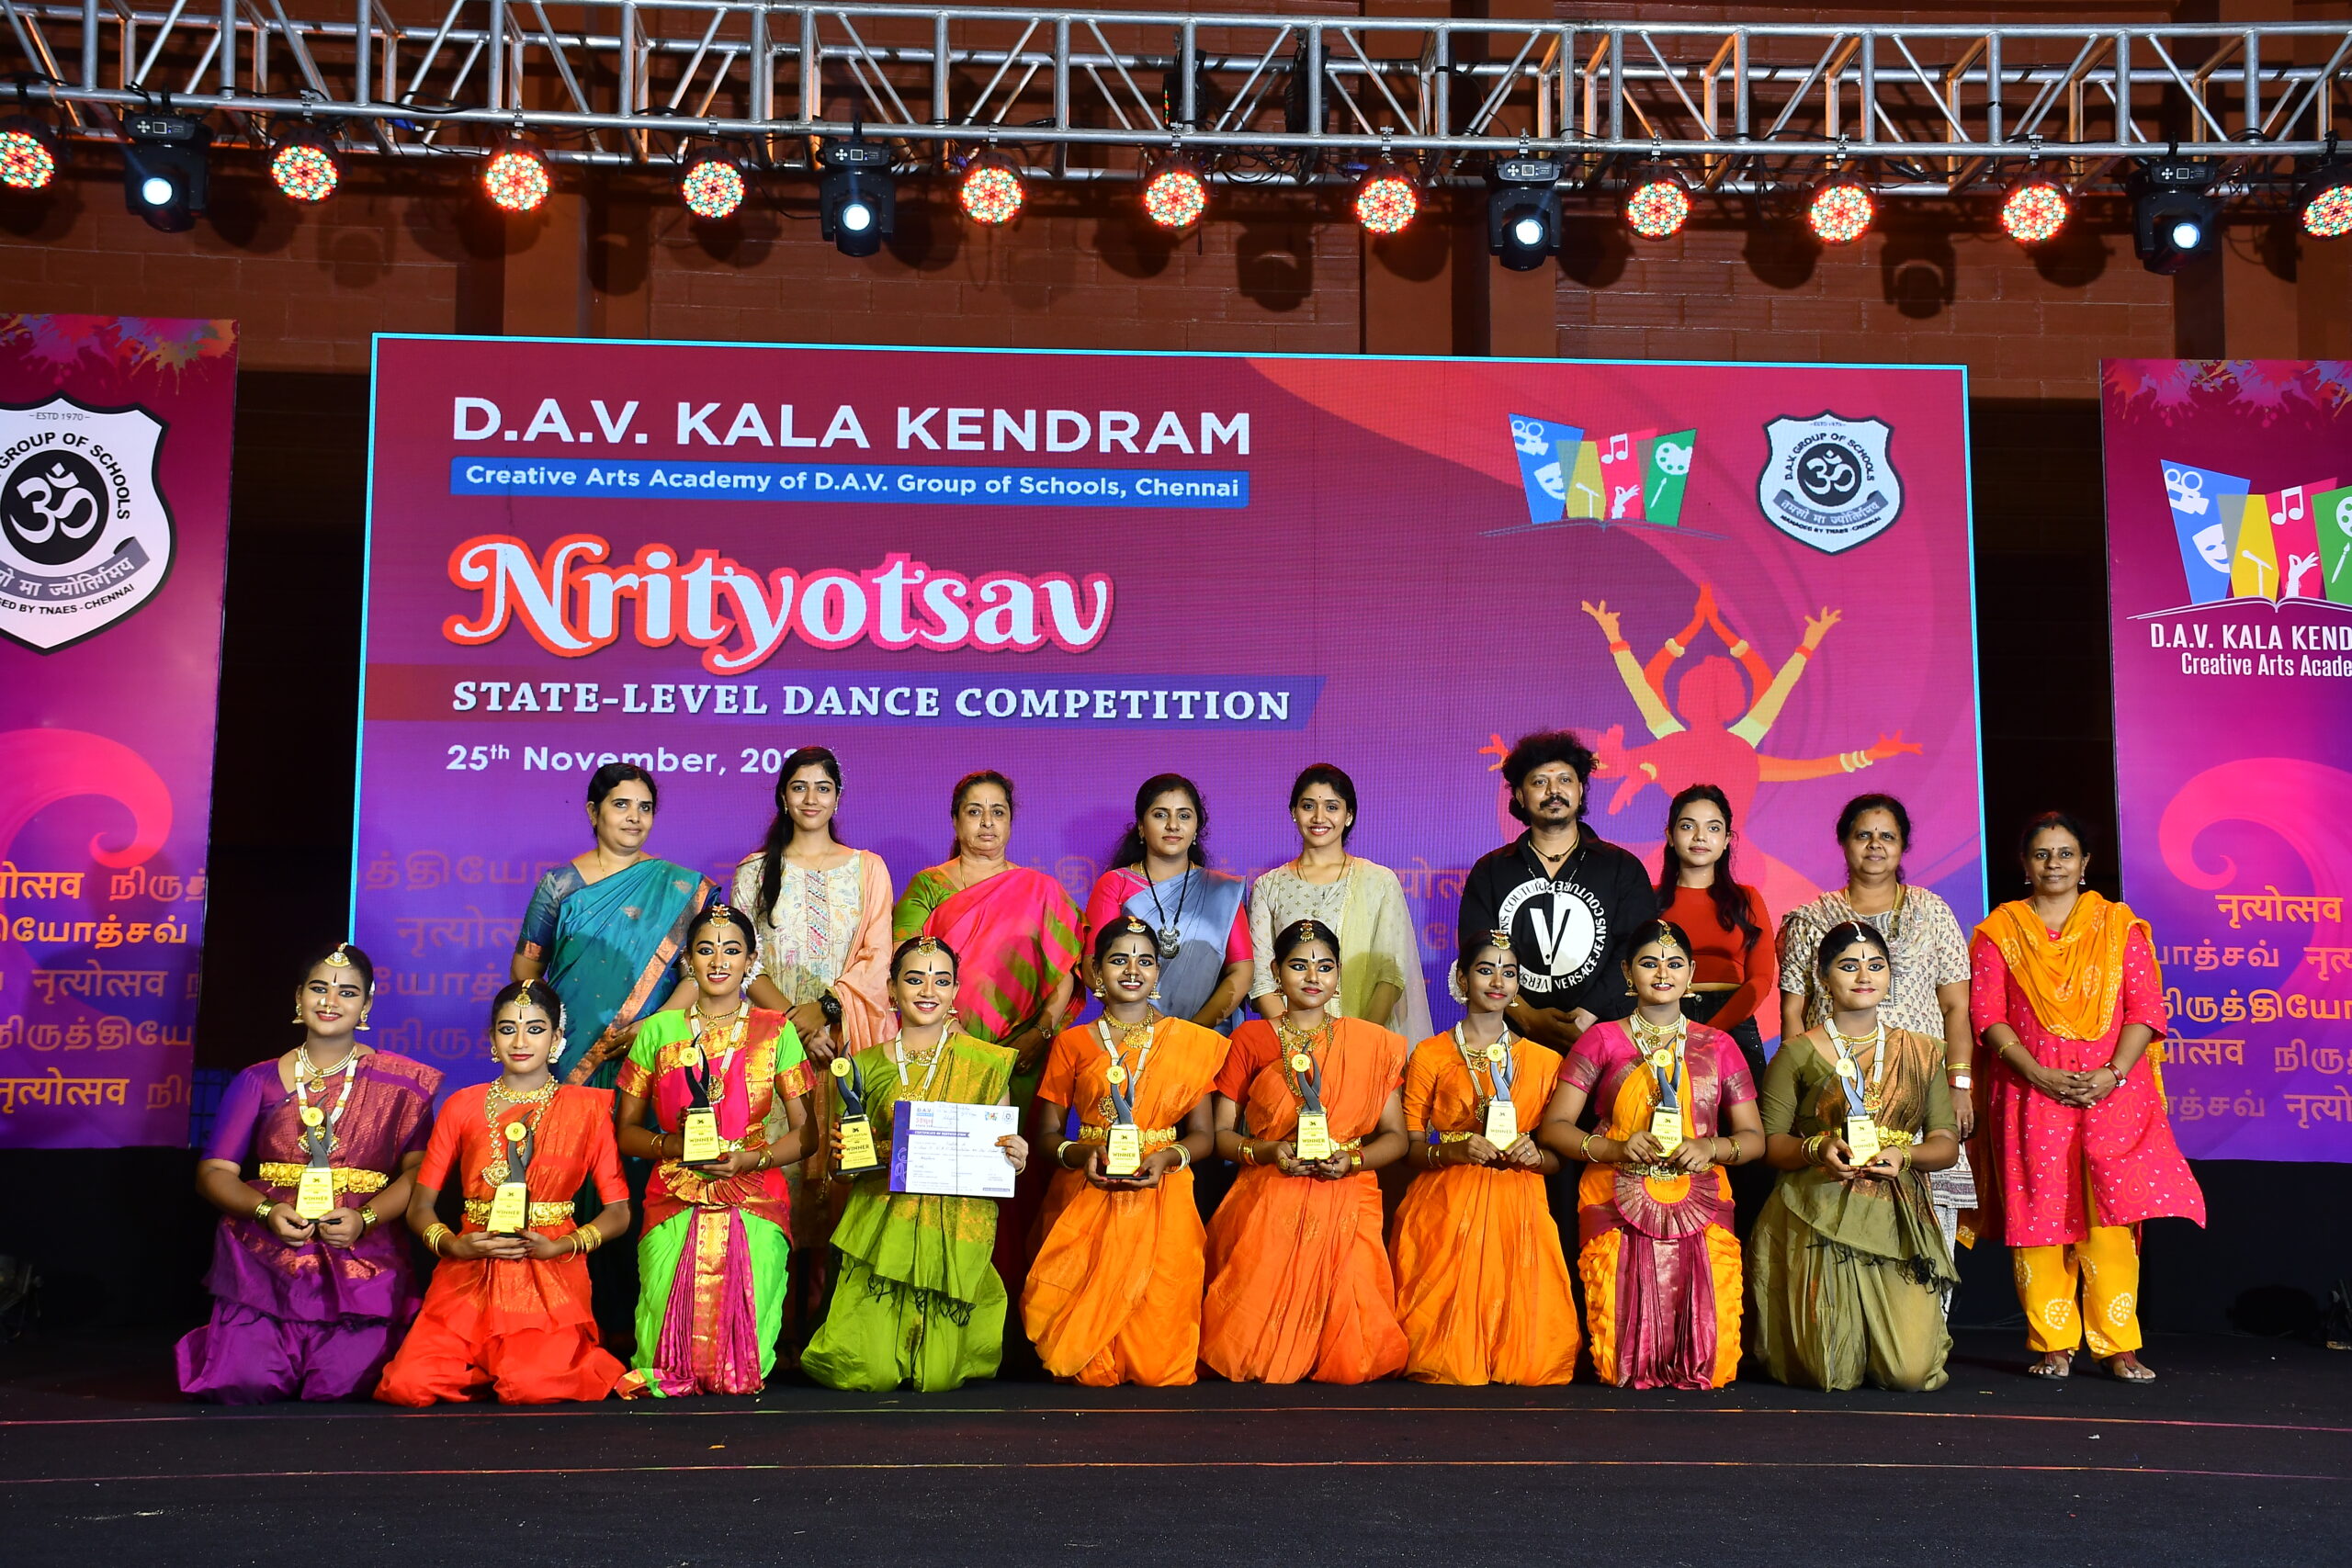 D.A.V. GROUP OF SCHOOLS, CHENNAI CONDUCTS NRITYOTSAV – STATE LEVEL TRADITIONAL DANCE COMPETITION